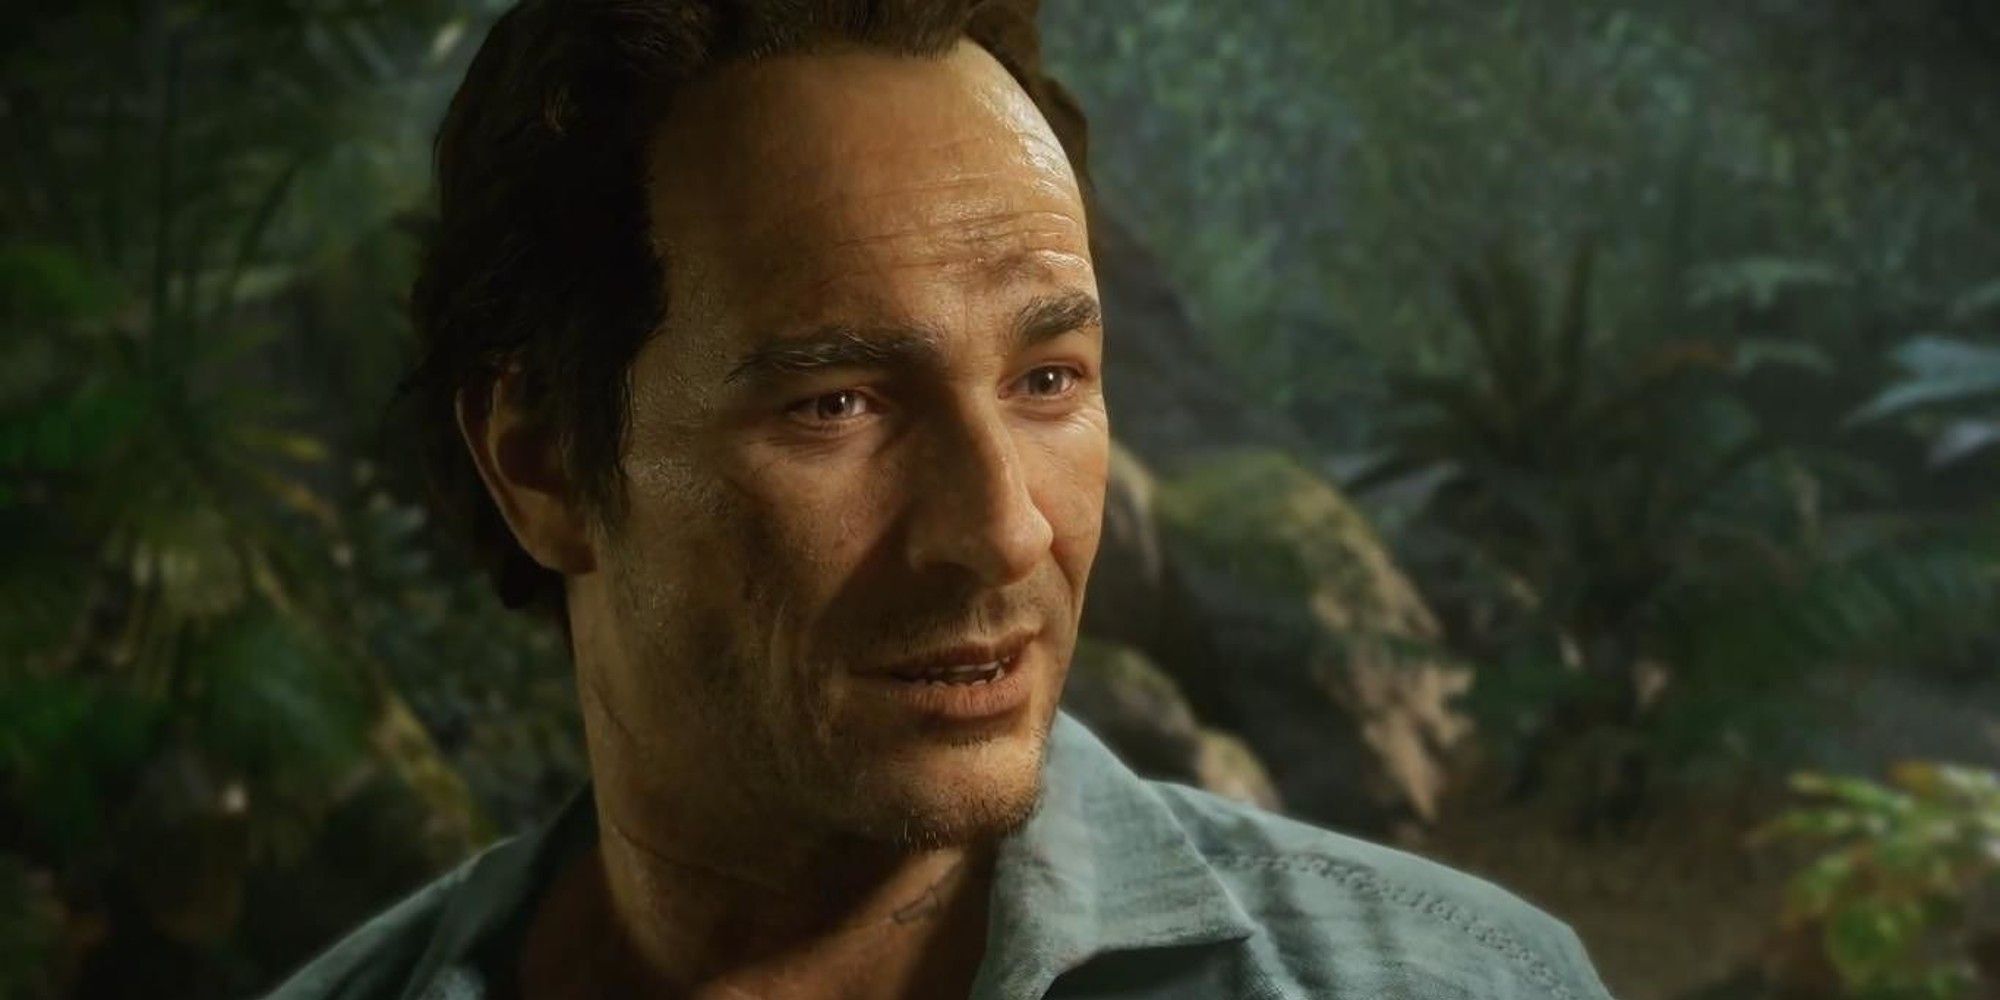 Uncharted Easter Eggs Sam Drake from Uncharted 4, standing in a forest, looking suspicious